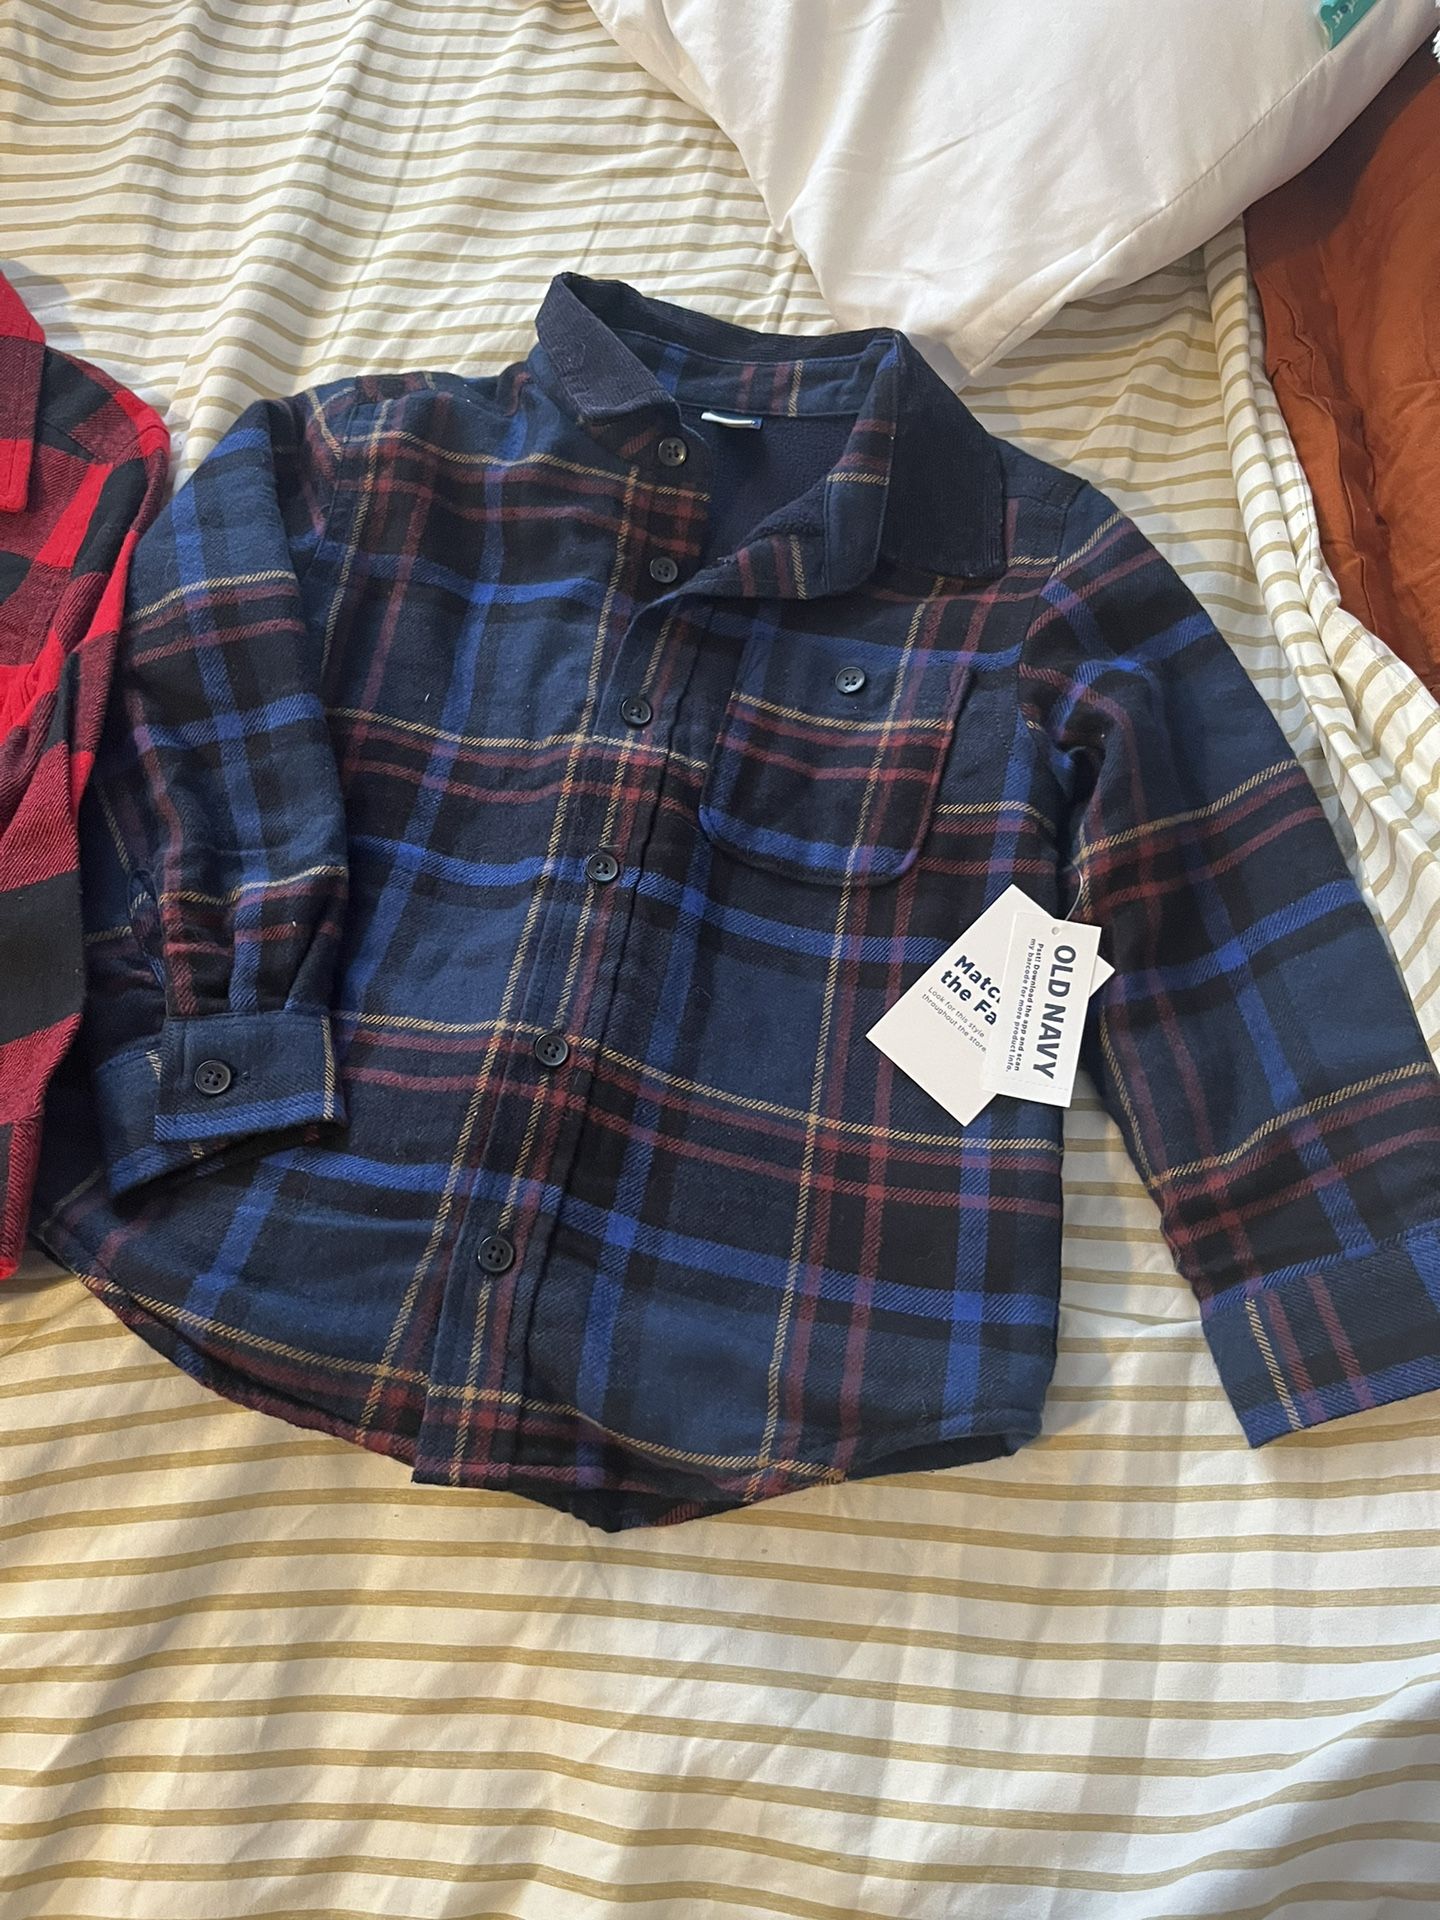 New 4T Plaid Shirts Old Navy 